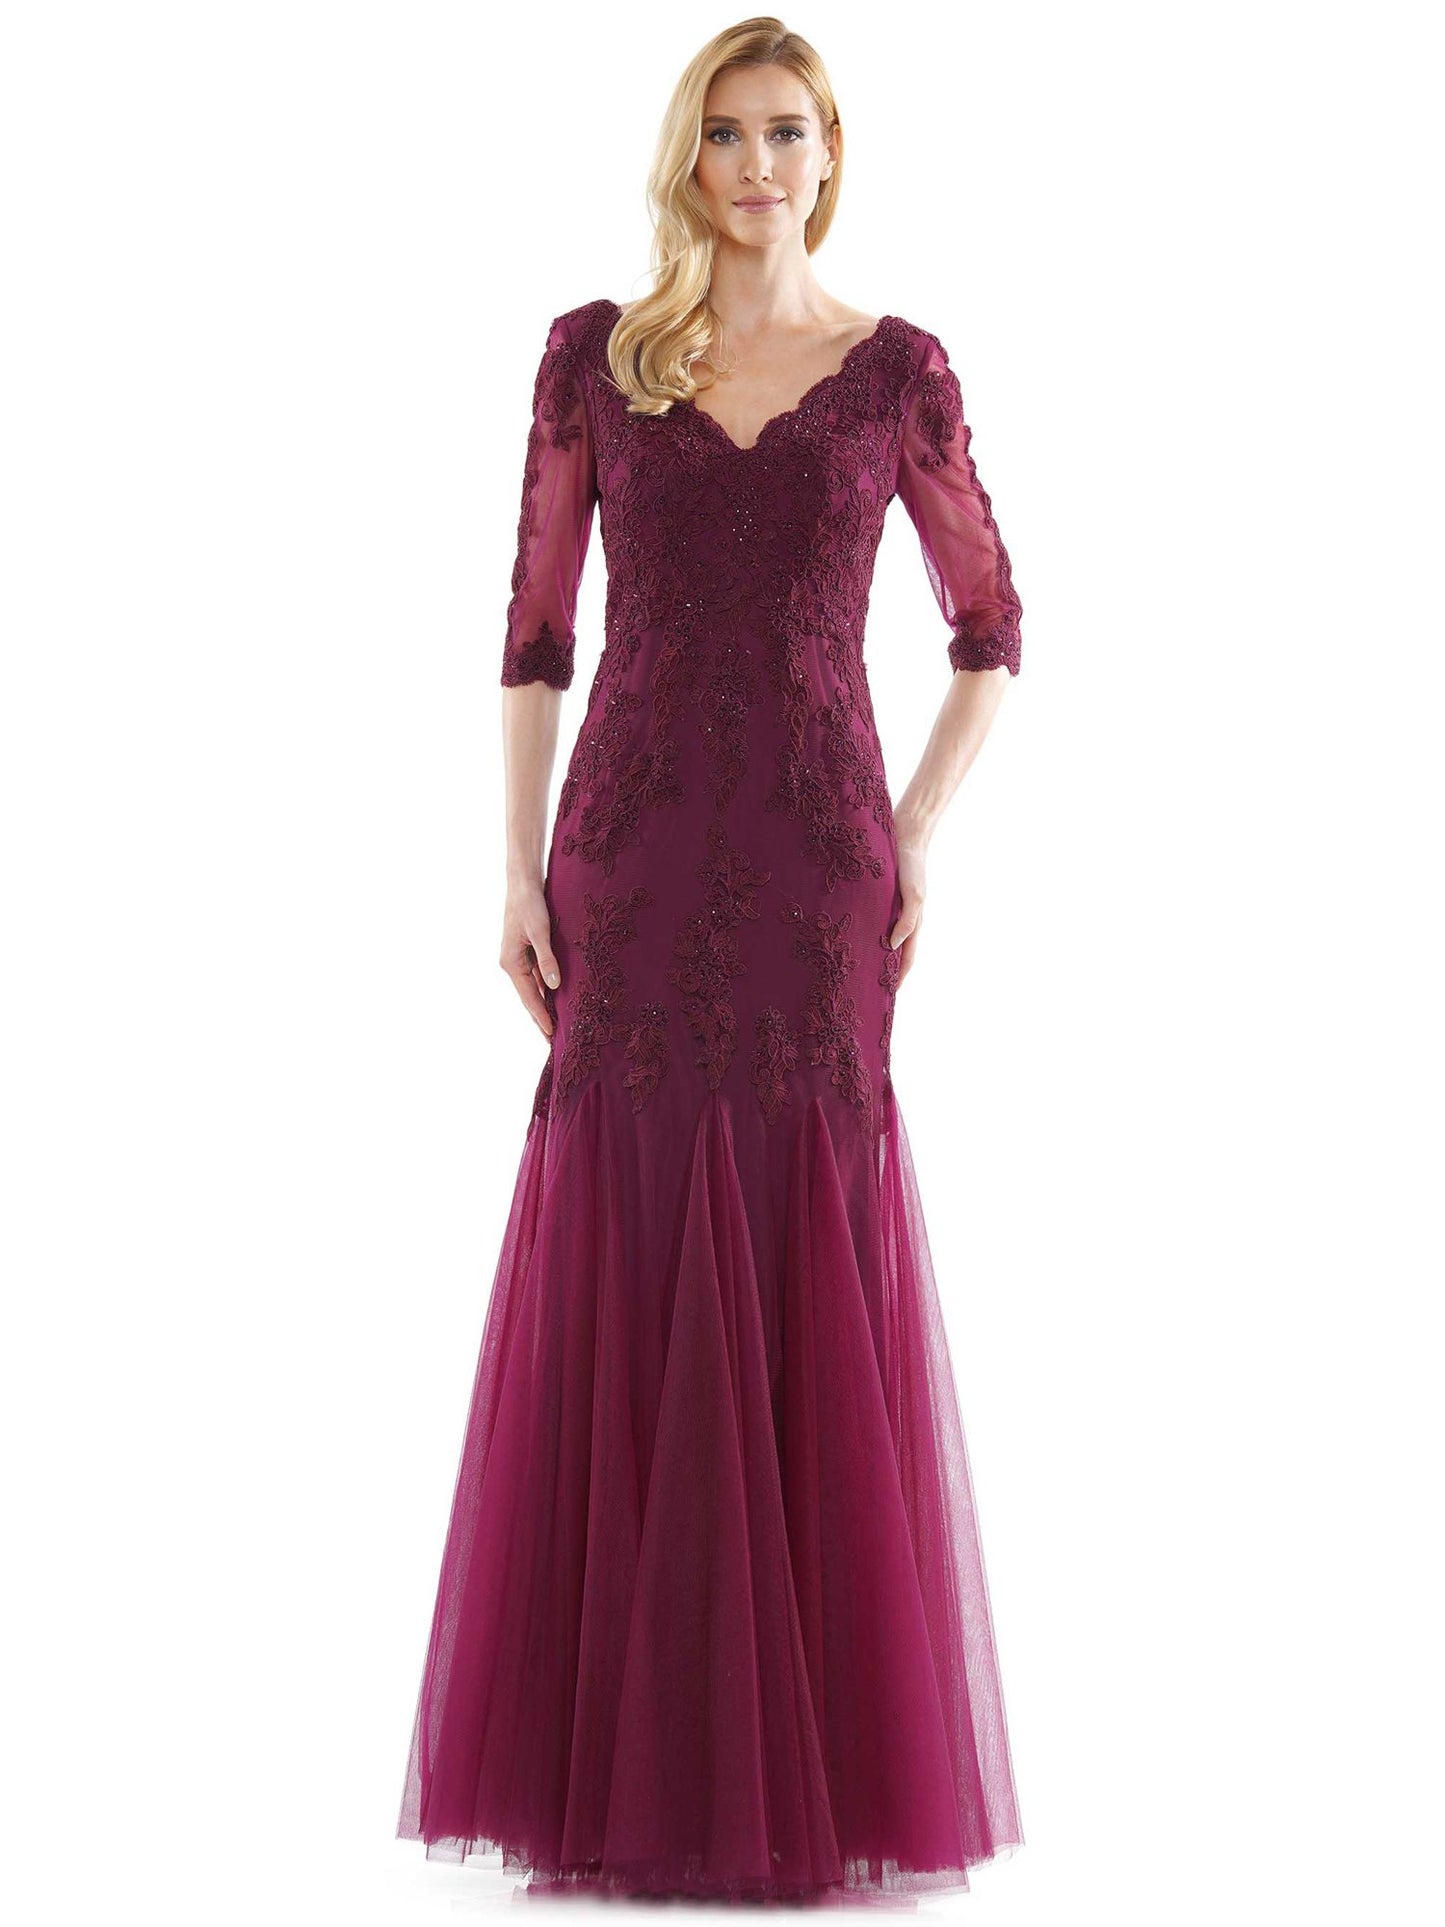 Marsoni by Colors Flower Detailed with Tulle Skirt and Sheer Sleeves Dress M162